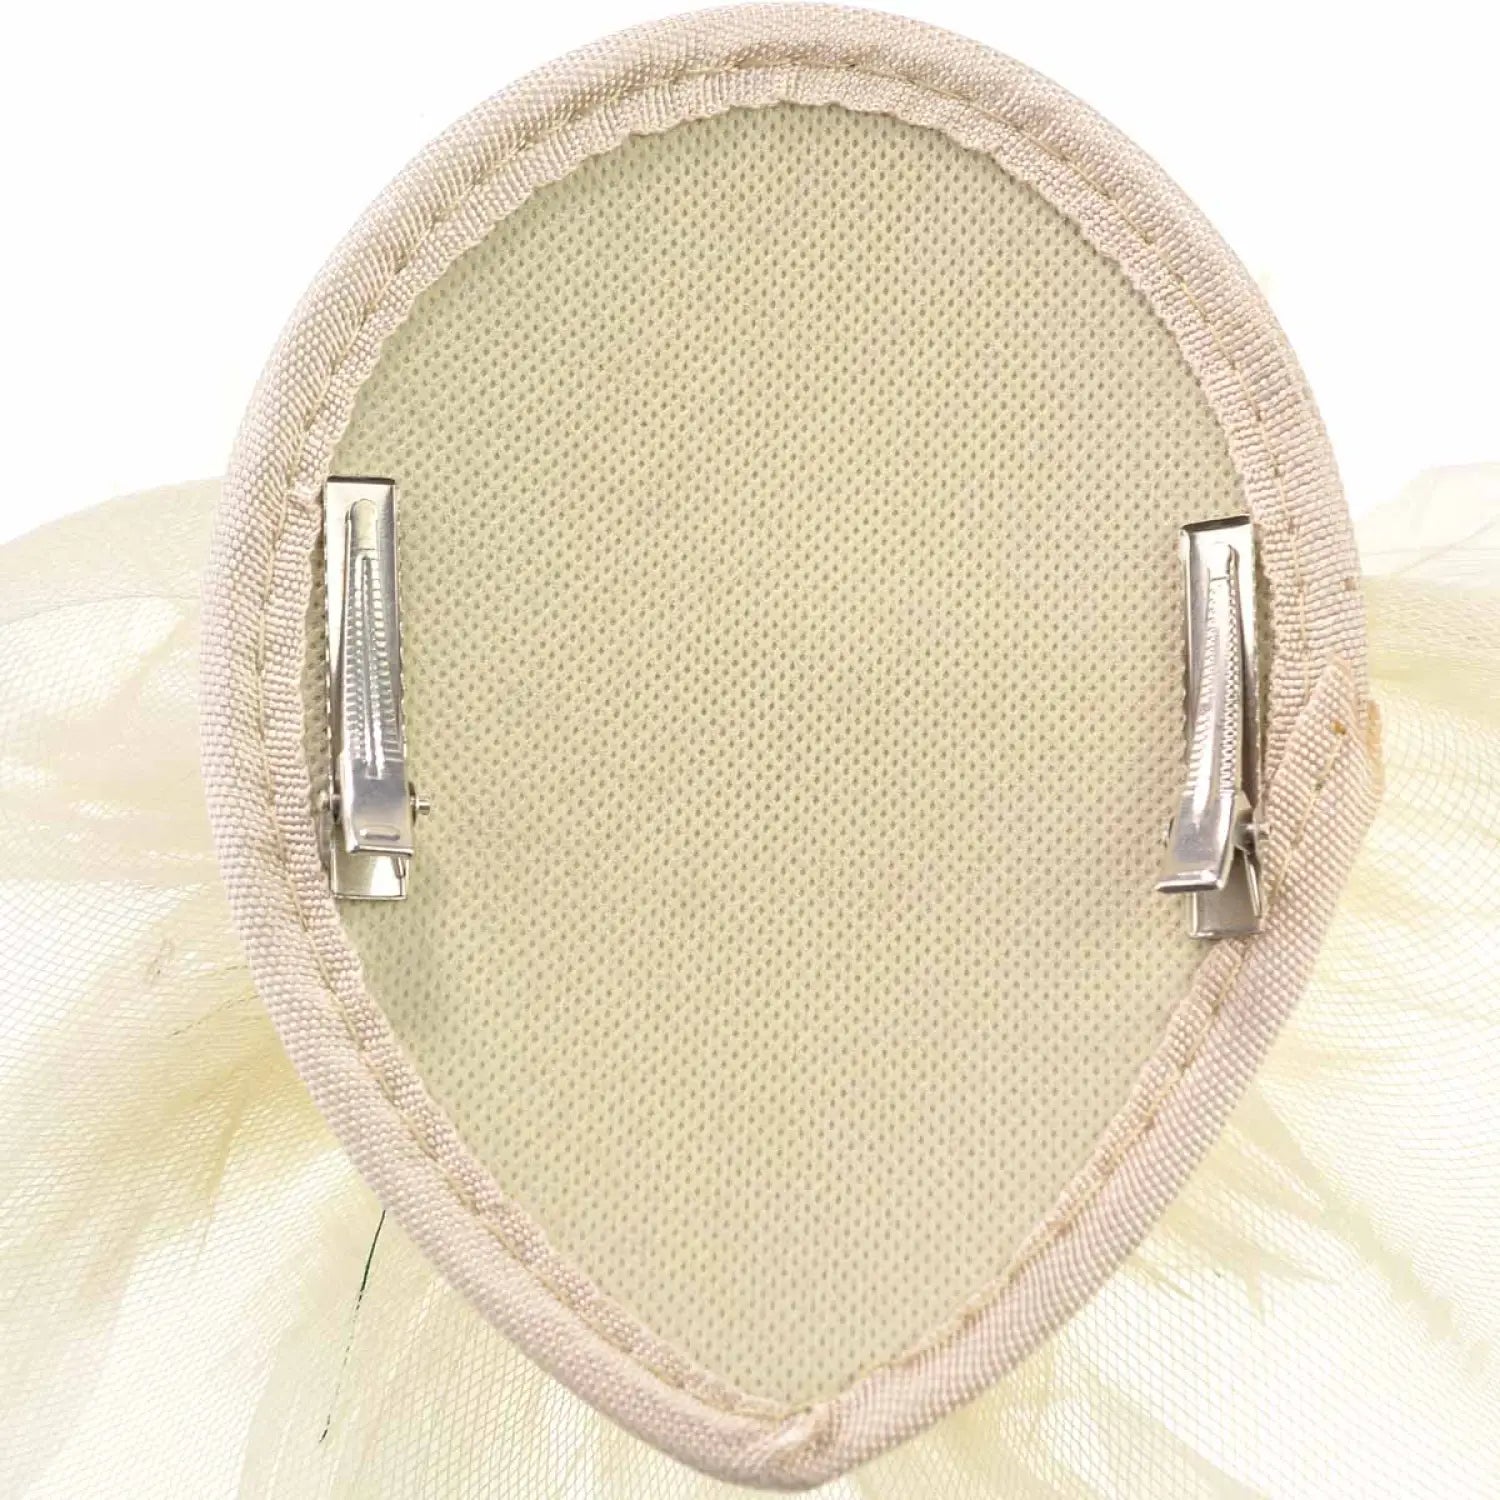 White tutu with silver buckle accessory for glamorous evenings.